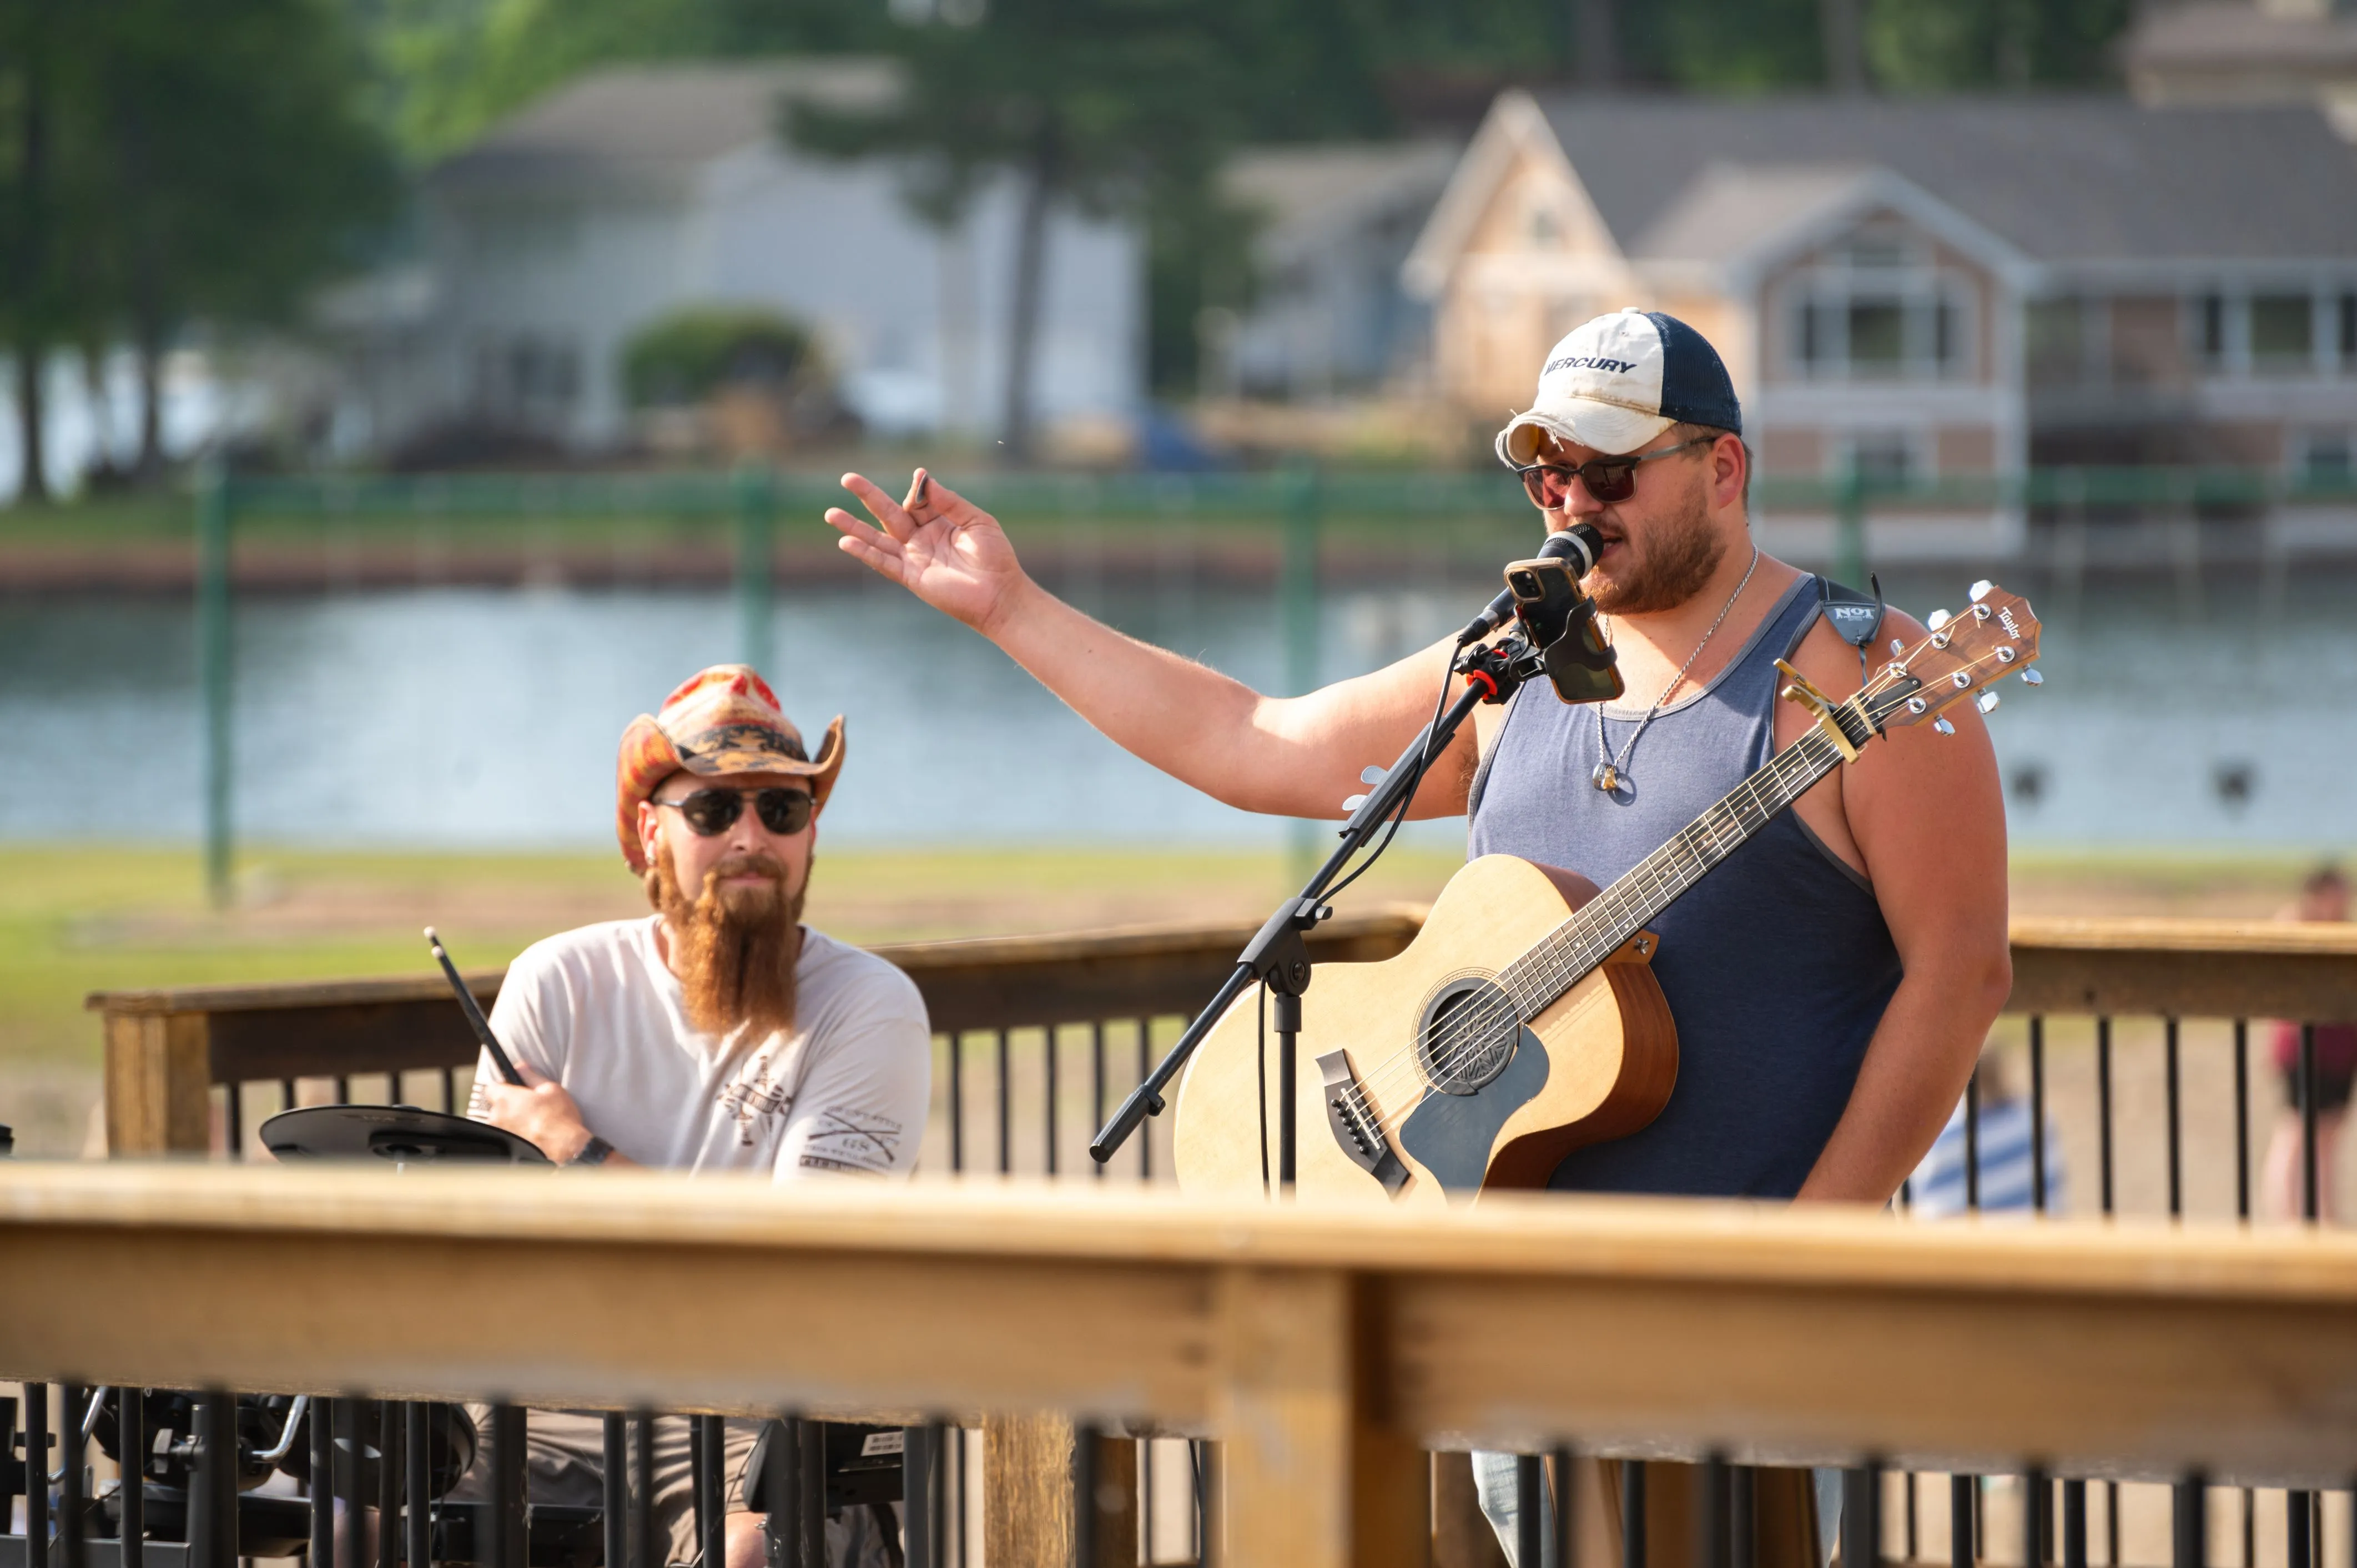 Two musicians performing on a wooden deck by a lake, one playing guitar and the other singing with a microphone.